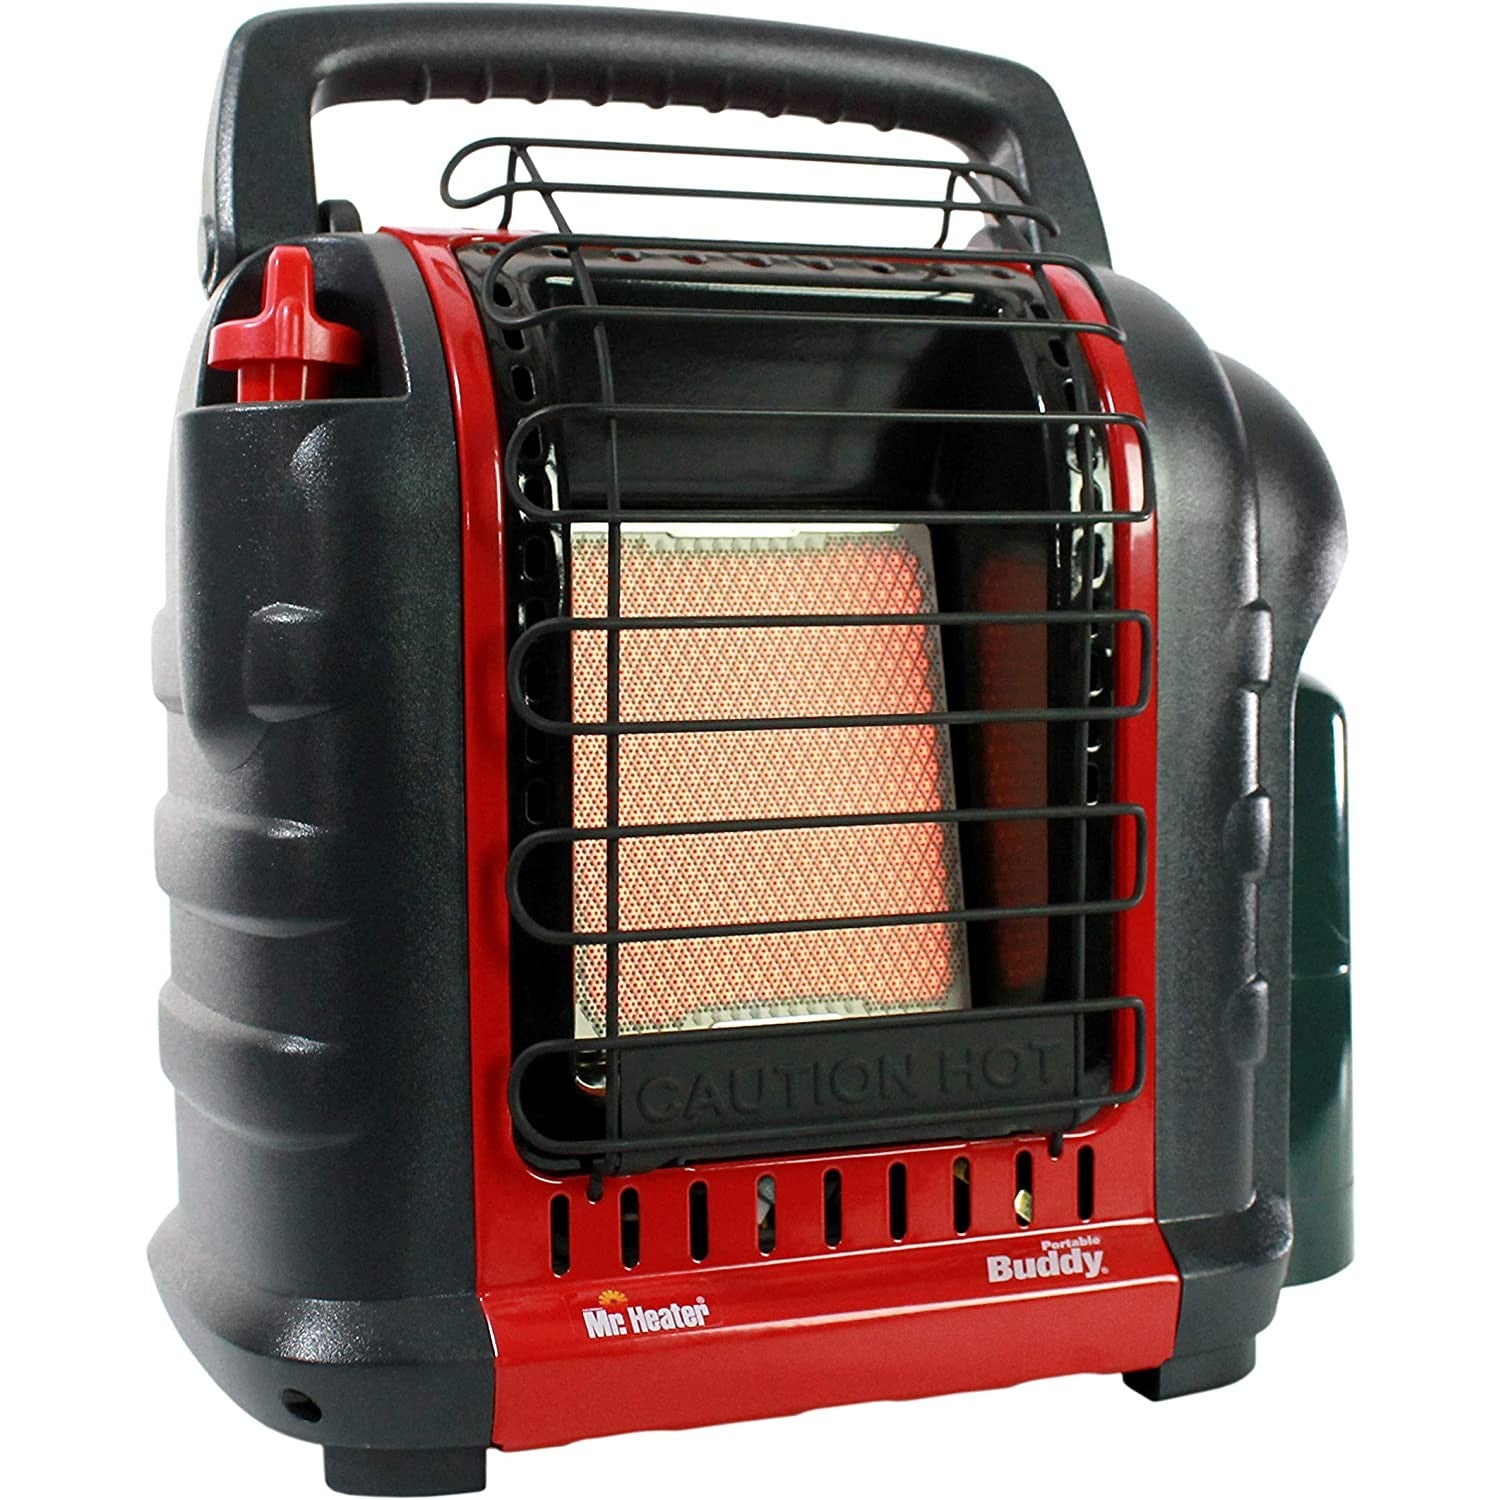 A red and black indoor outdoor propane radiant heater on a white background.